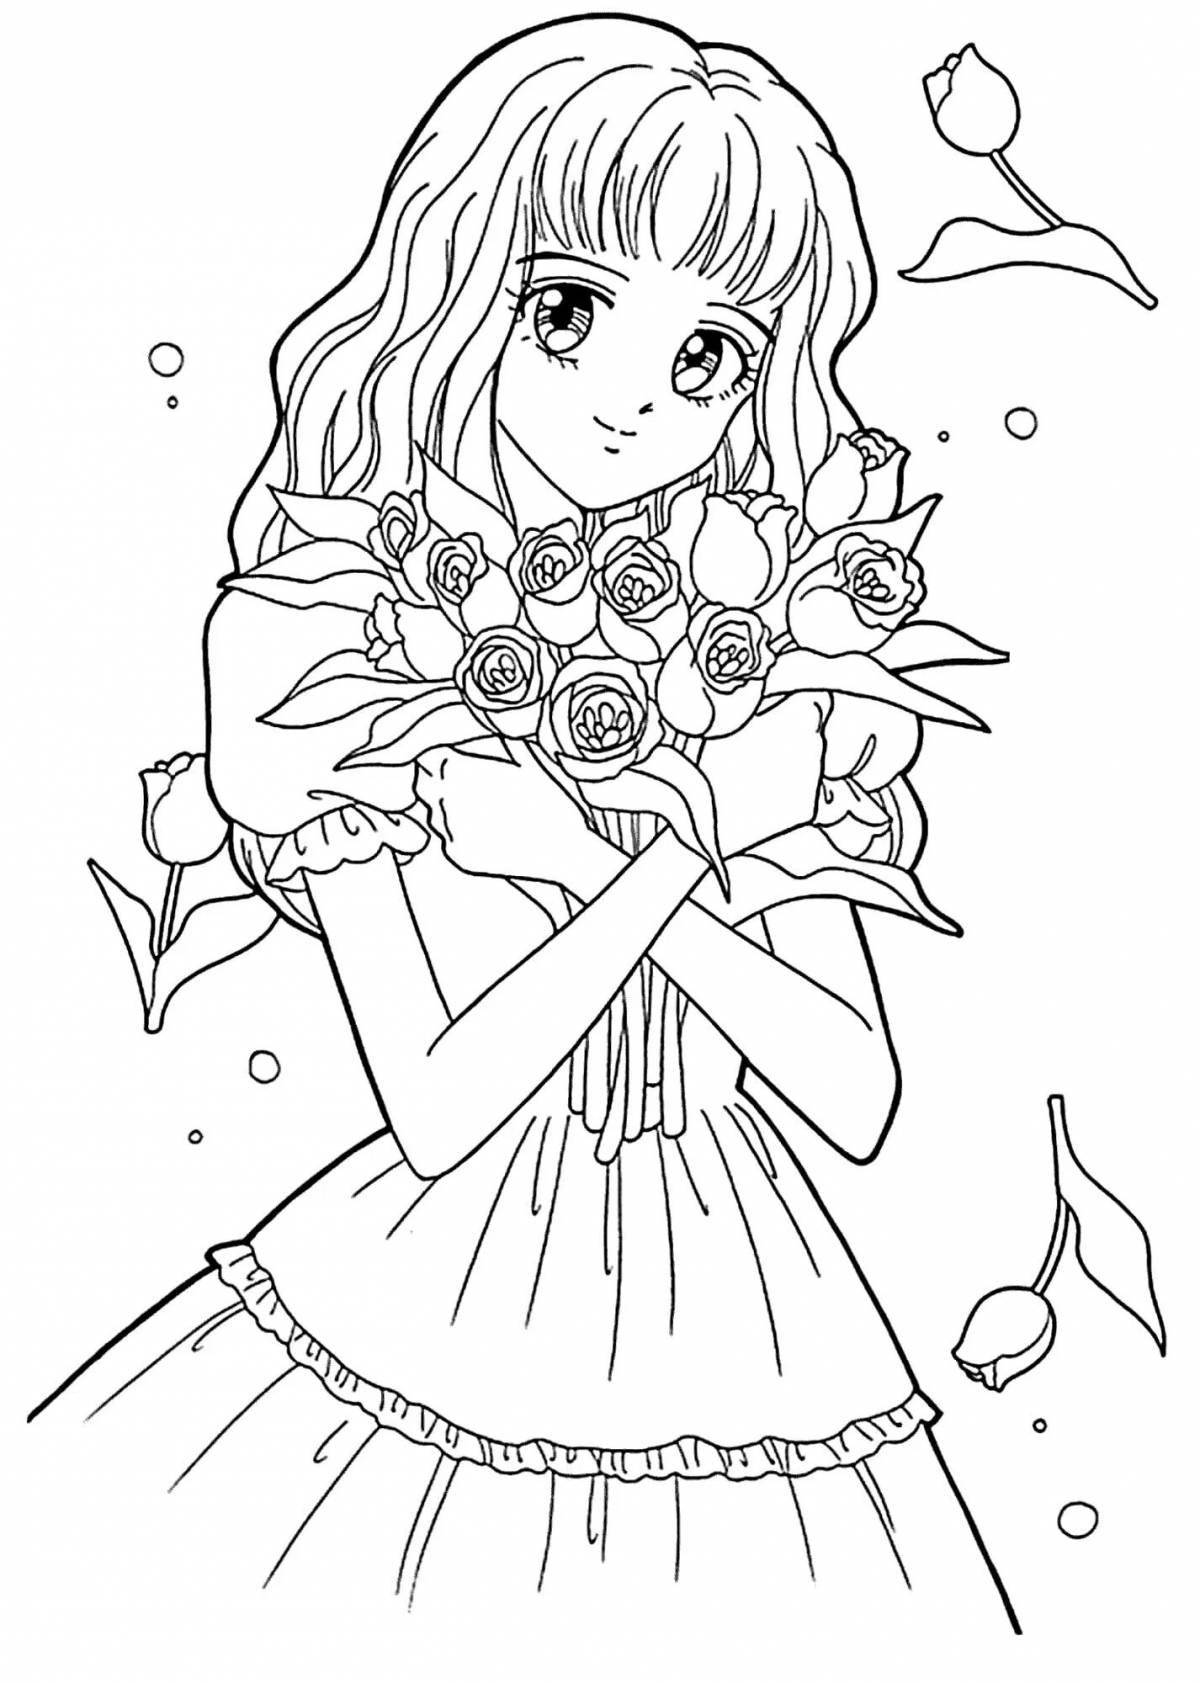 Colorific coloring page 8-9 years for girls